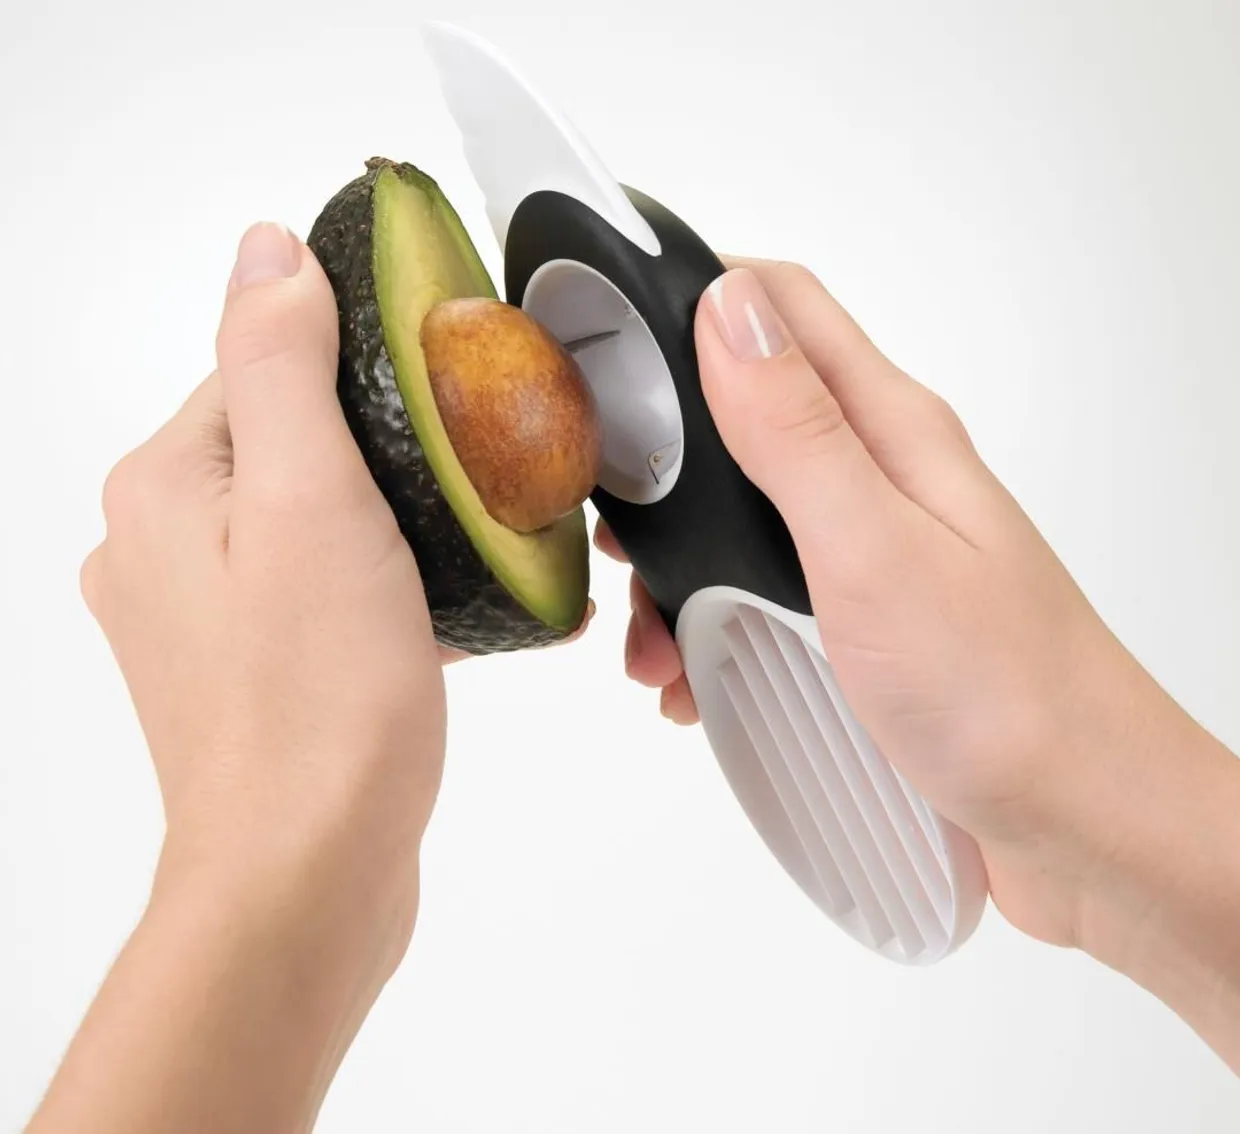 Avocadosnijder 3-in-1